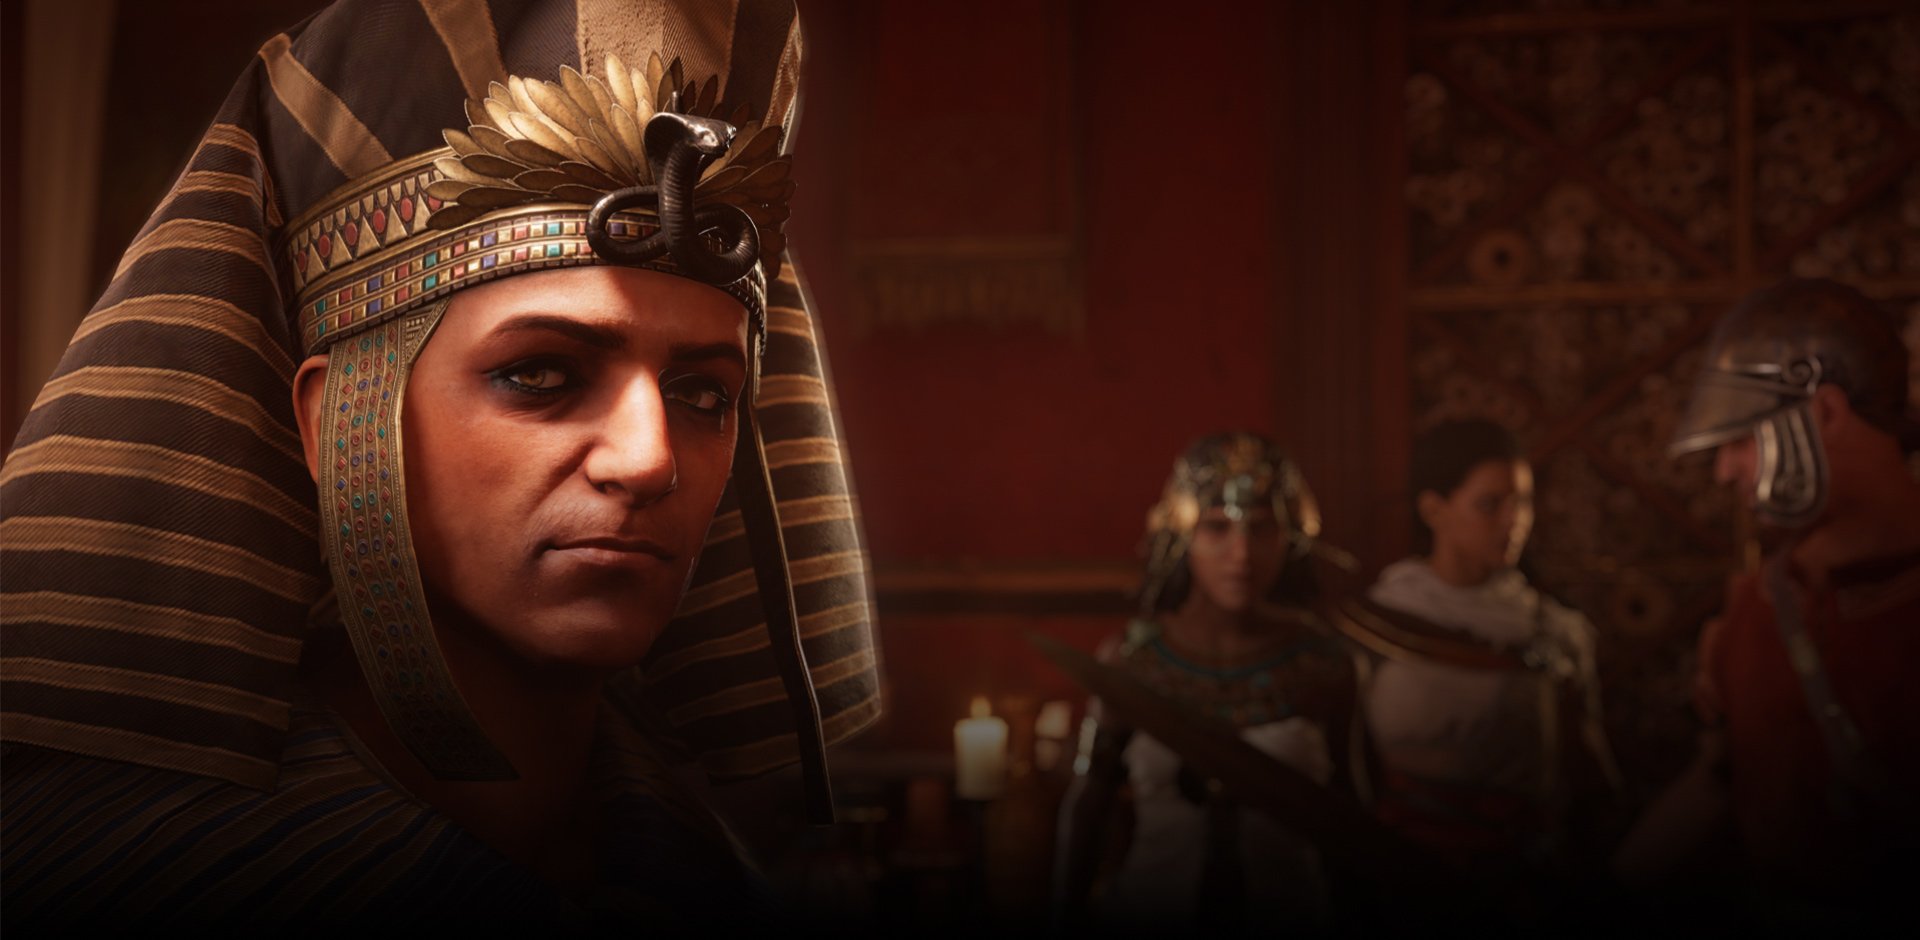 Buy Assassin's Creed® Origins Gold Edition for PC